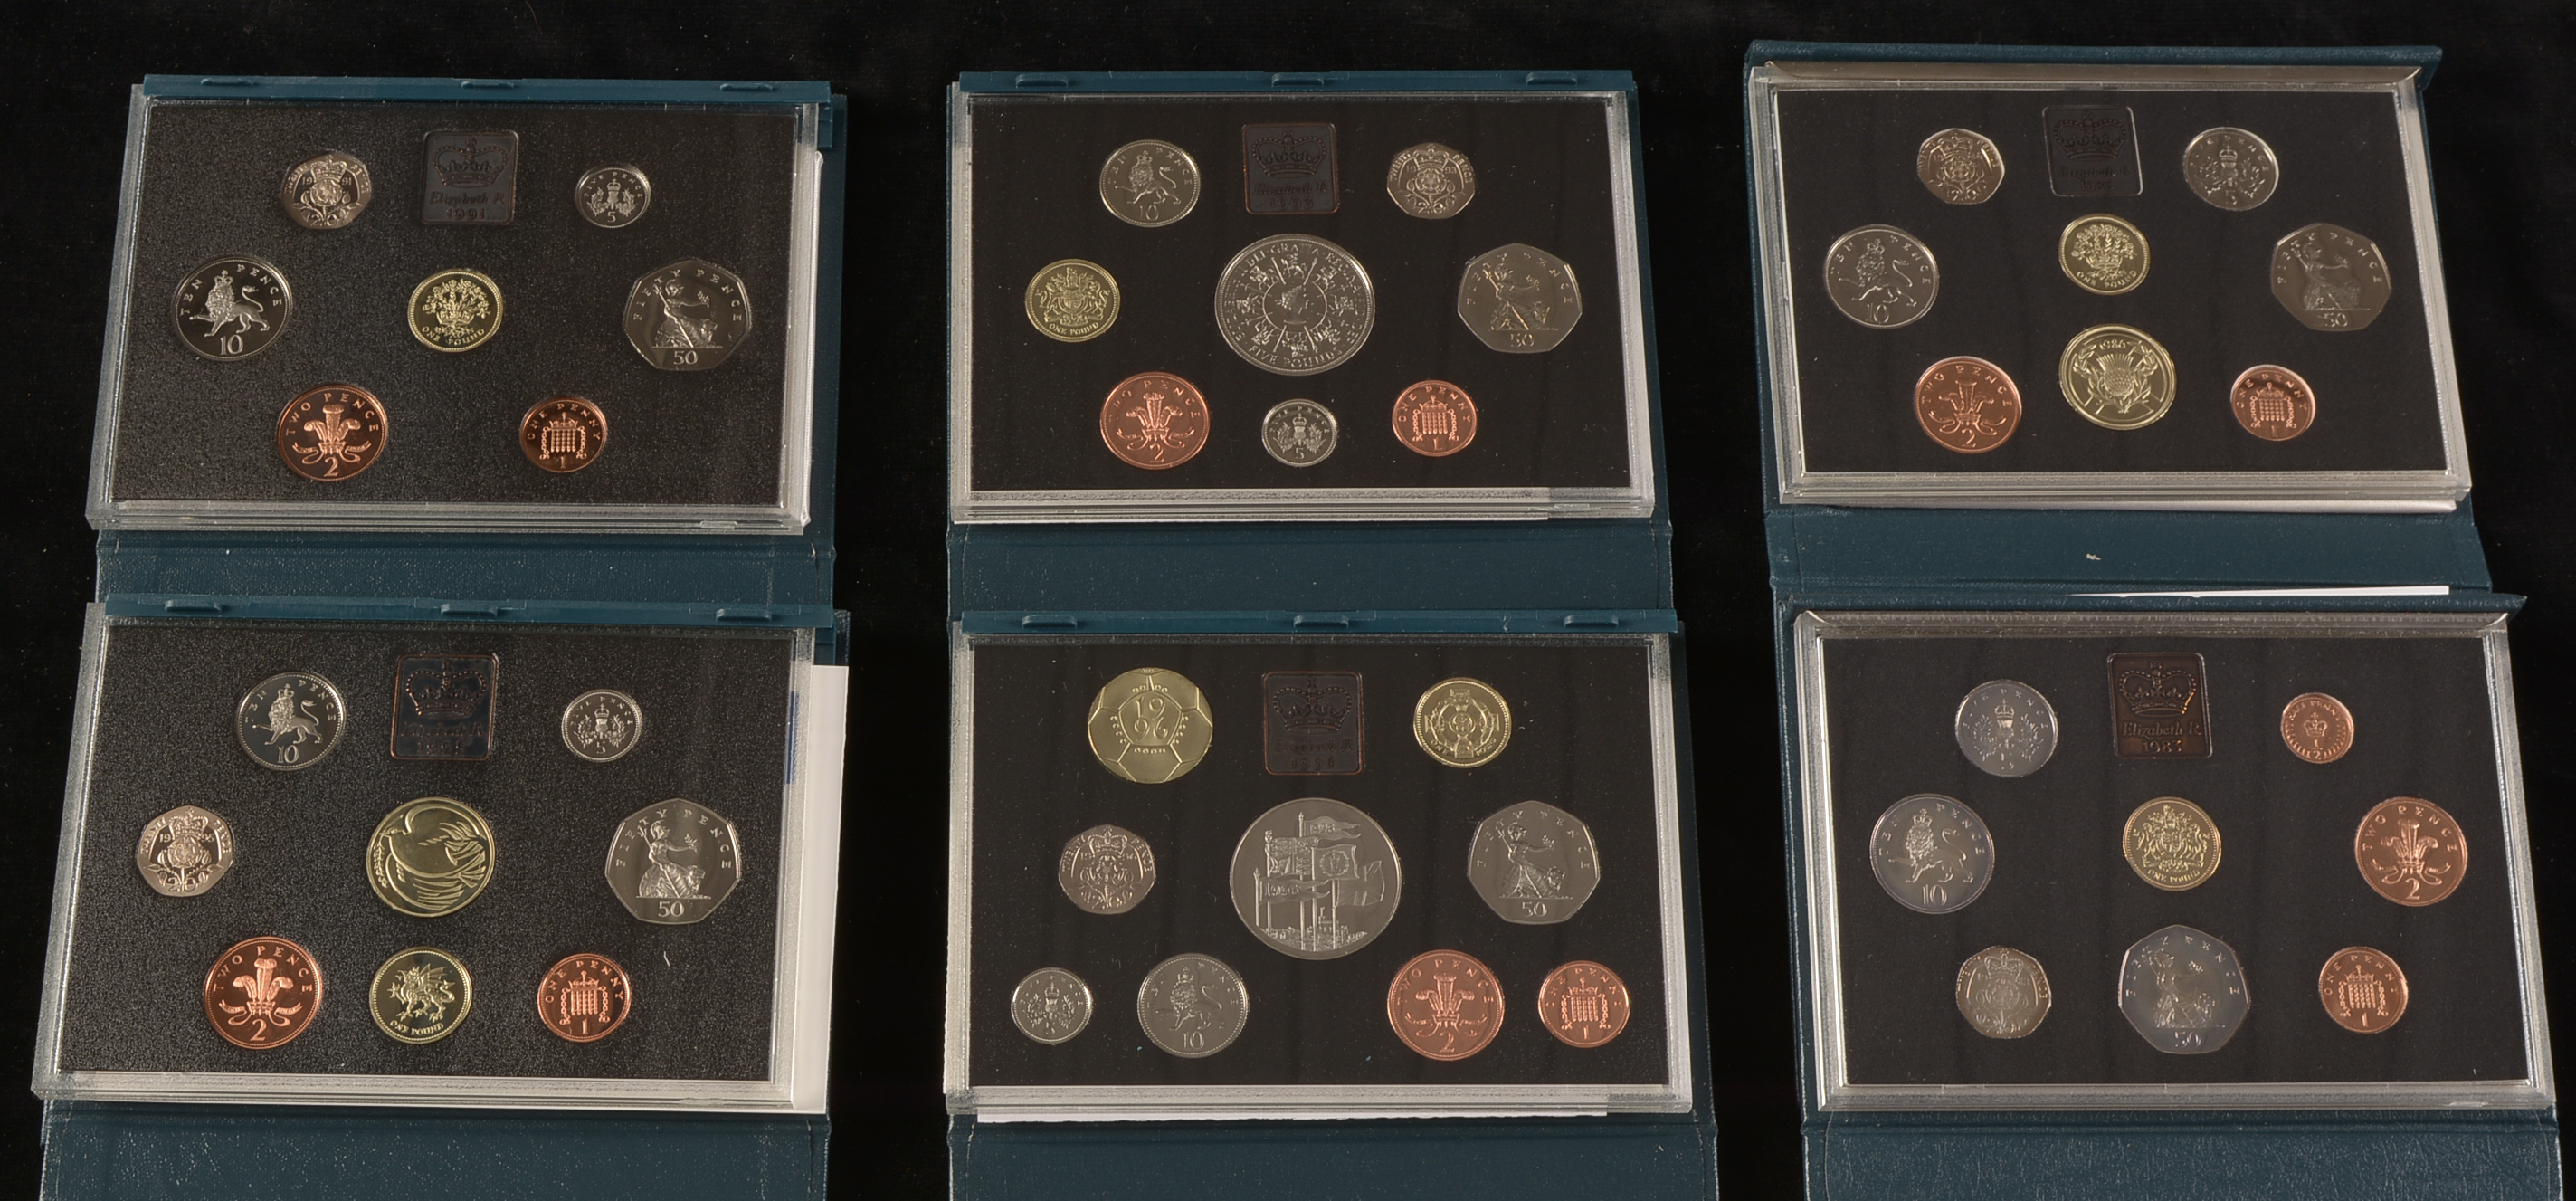 GB Royal Mint proof sets and other coins - Image 6 of 7